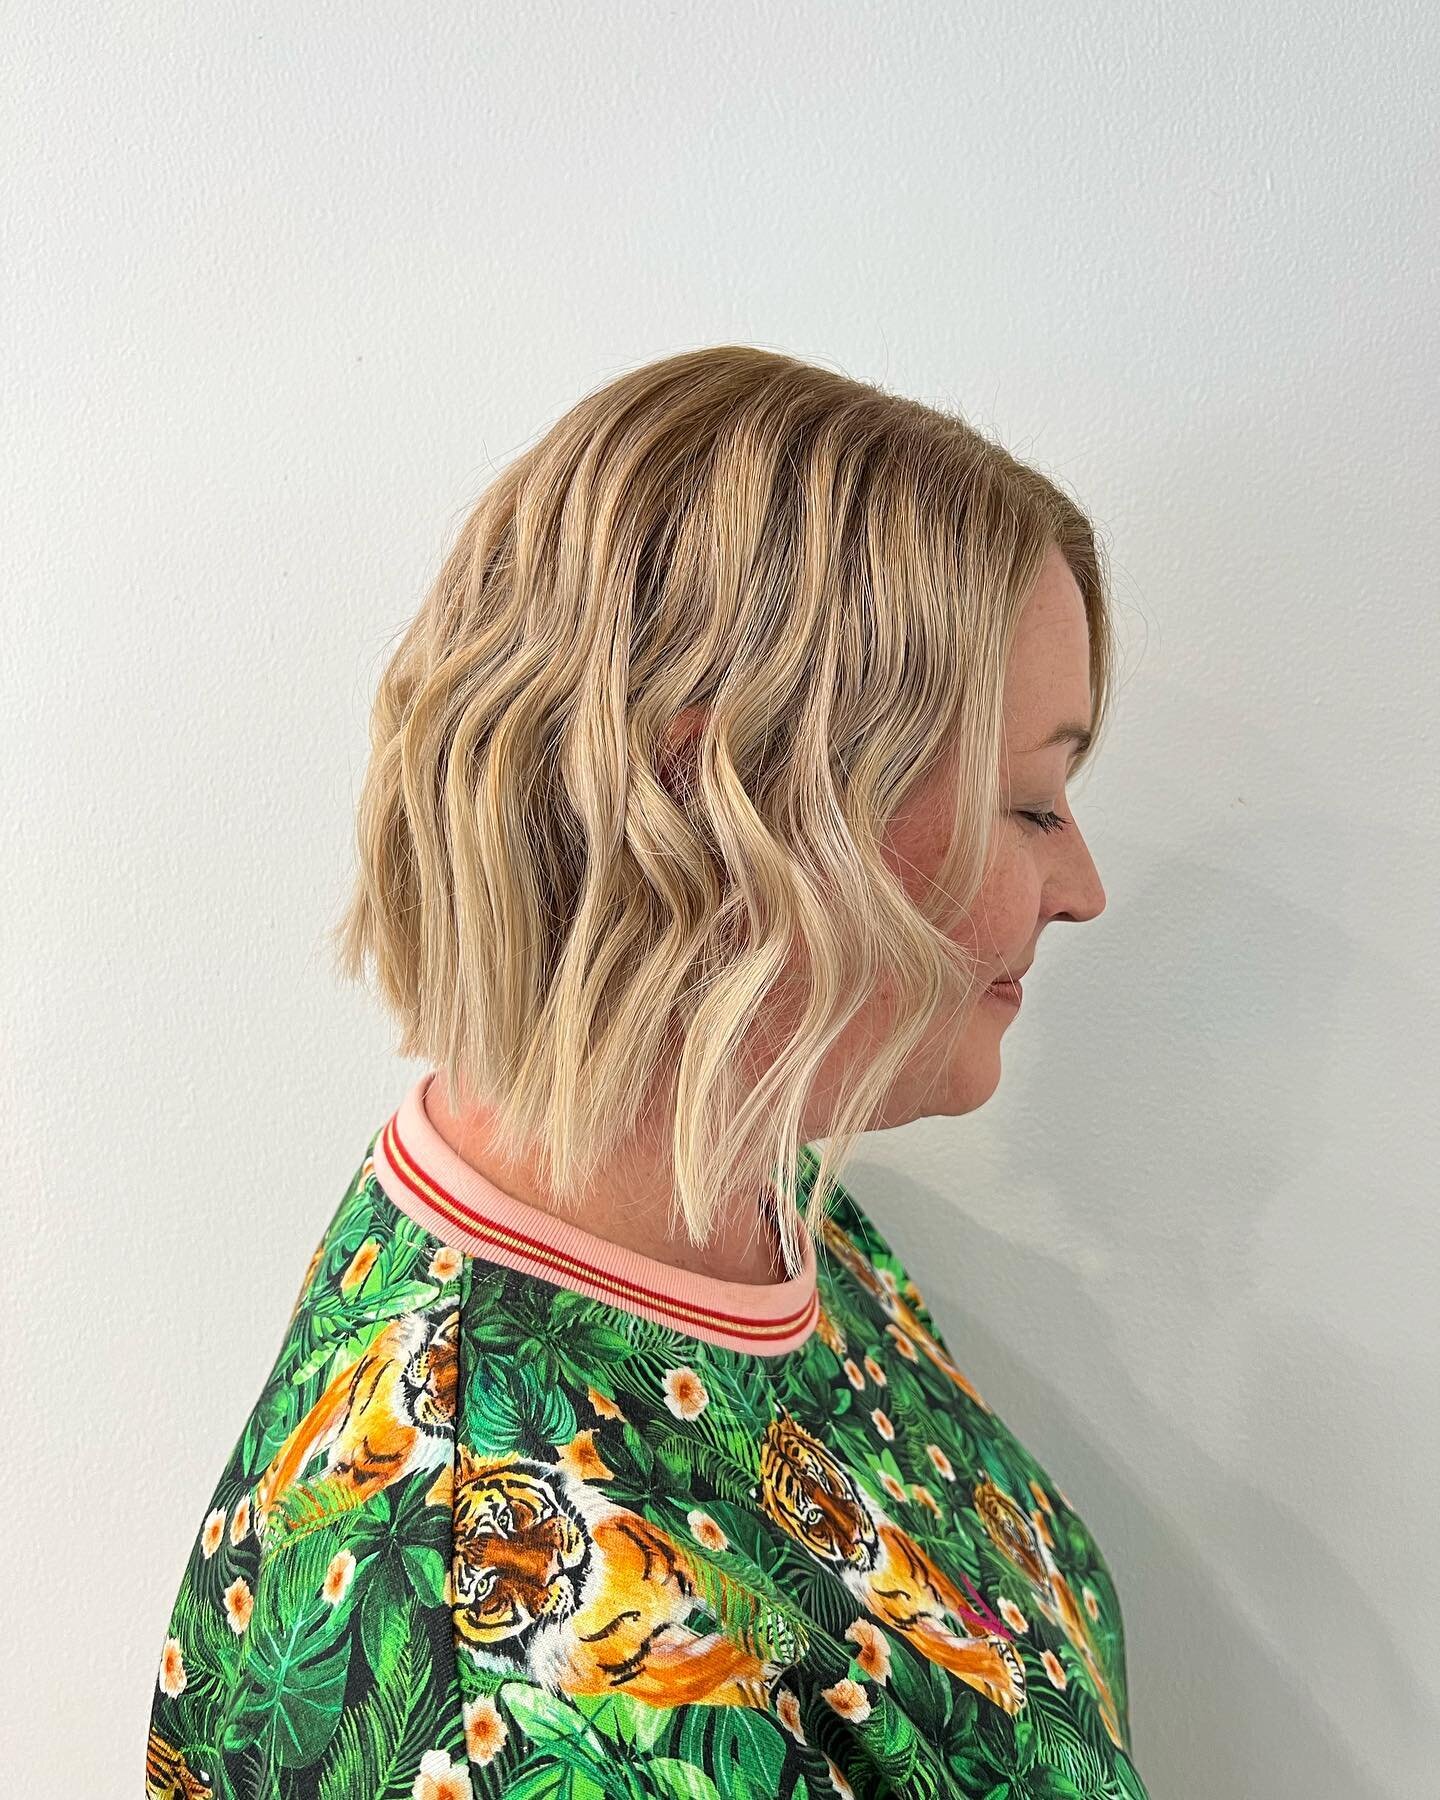 Beautiful blonde created by Rocco on one of our favorite long term client. #wella #wellahair #blondebob #lighterends